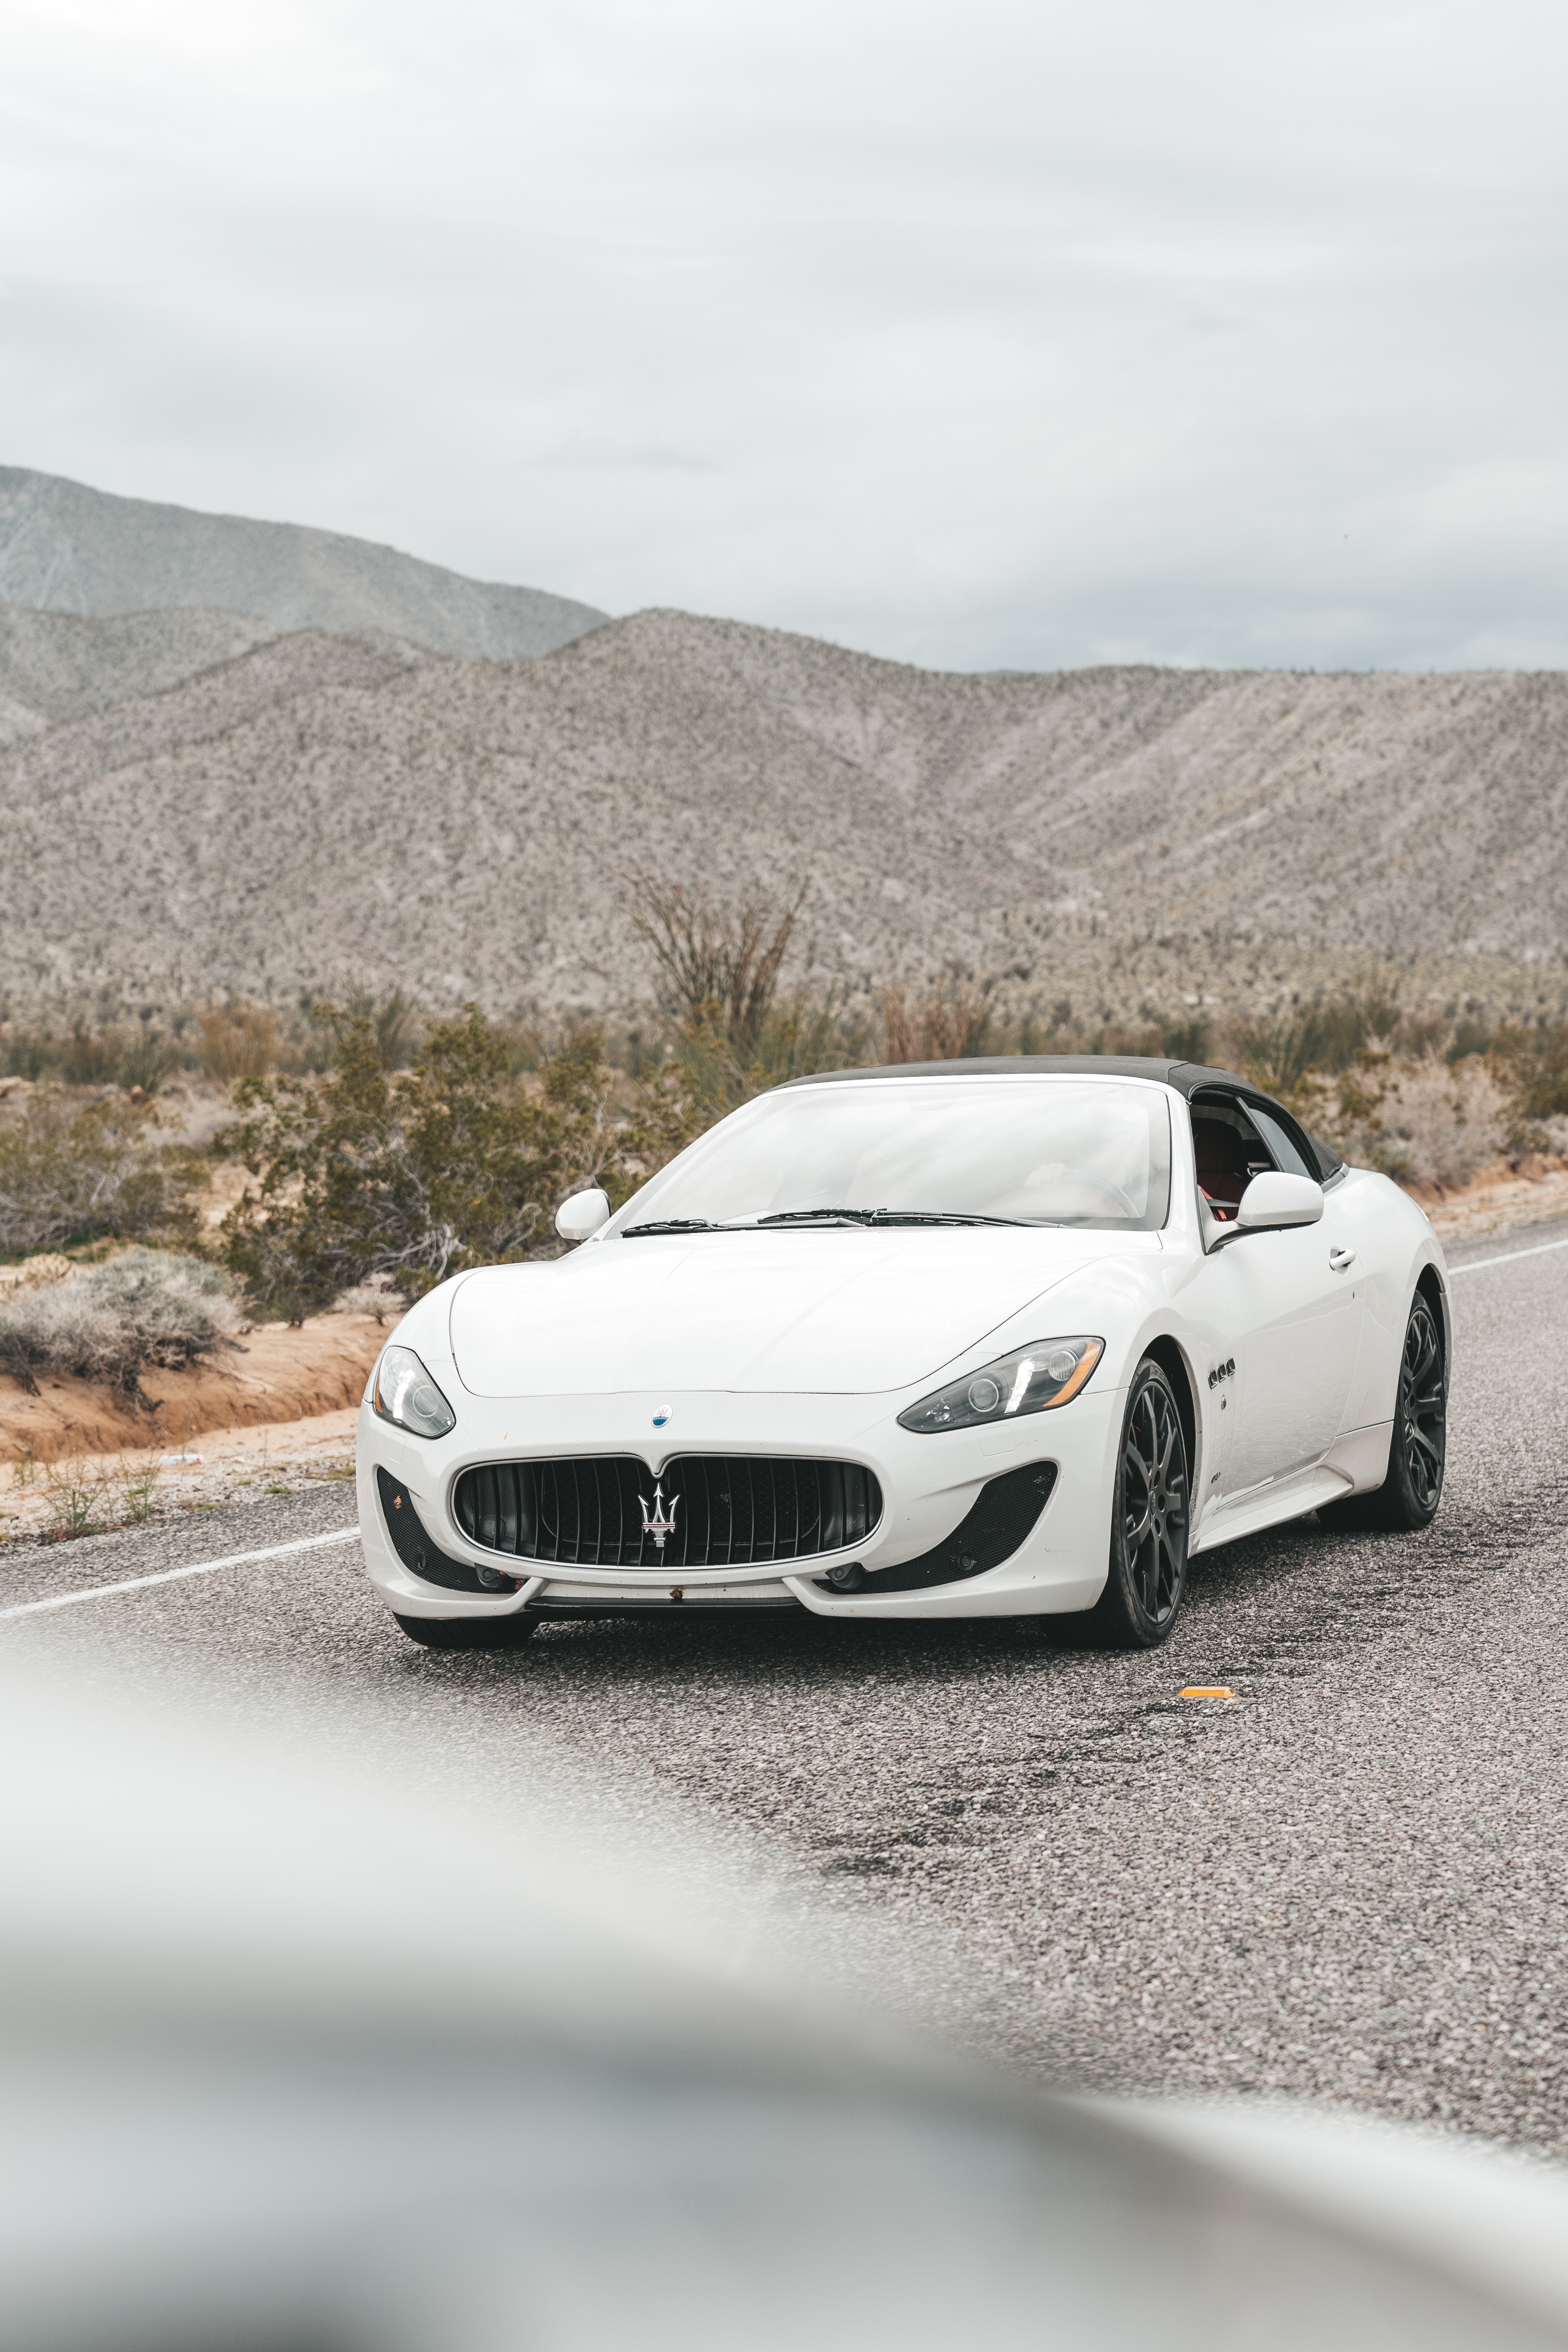 131341 Screensavers and Wallpapers Cabriolet for phone. Download sports, maserati, cars, white, car, machine, sports car, cabriolet, maserati grancabrio pictures for free